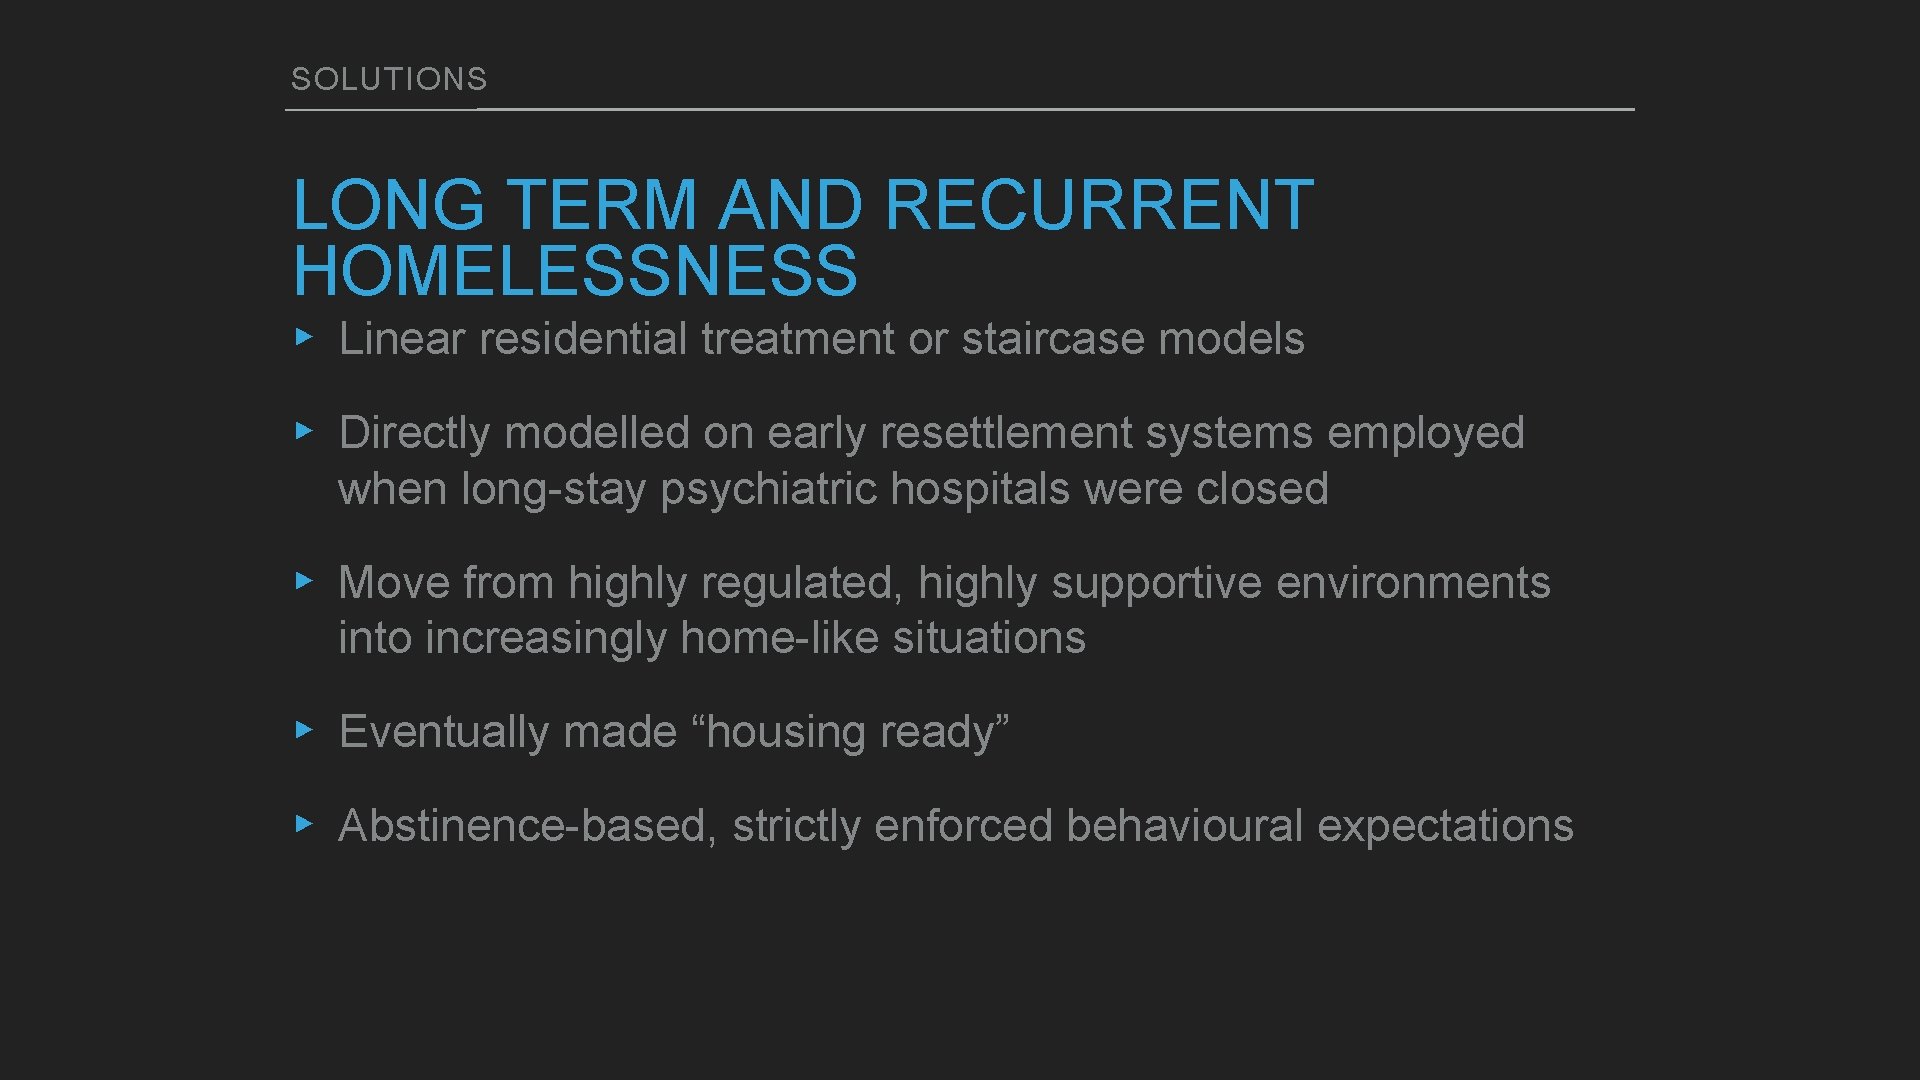 SOLUTIONS LONG TERM AND RECURRENT HOMELESSNESS ▸ Linear residential treatment or staircase models ▸